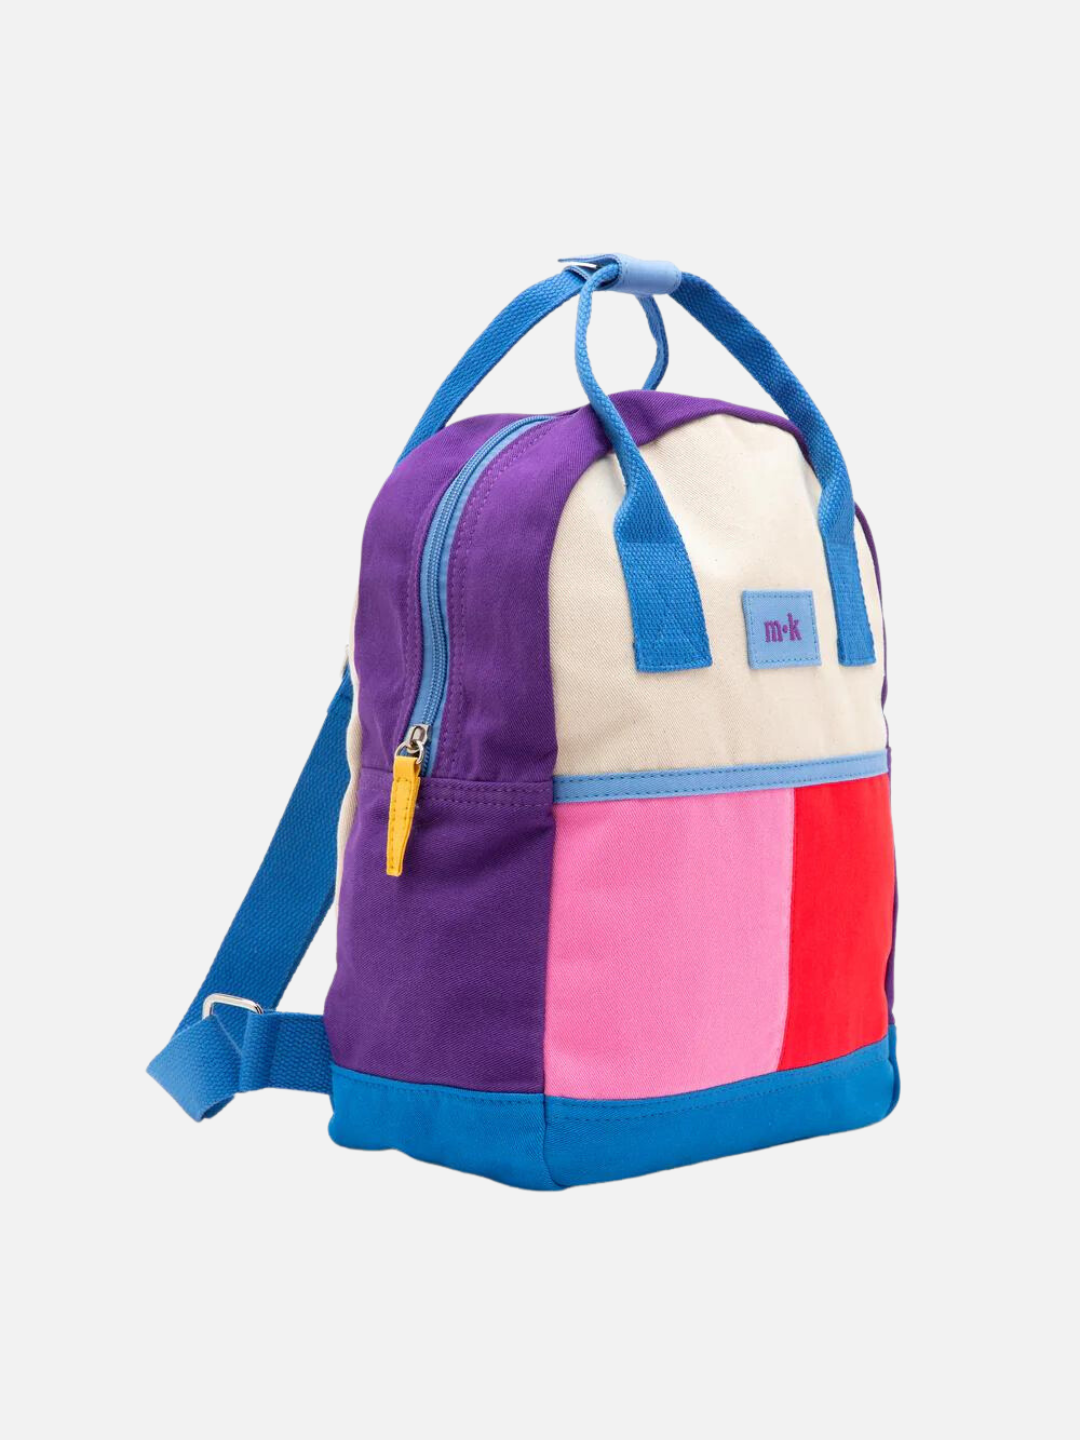 Side view of a colorblock backpack with bright blue straps, handles and base, purple sides, and one pink, one red patch under a cream top